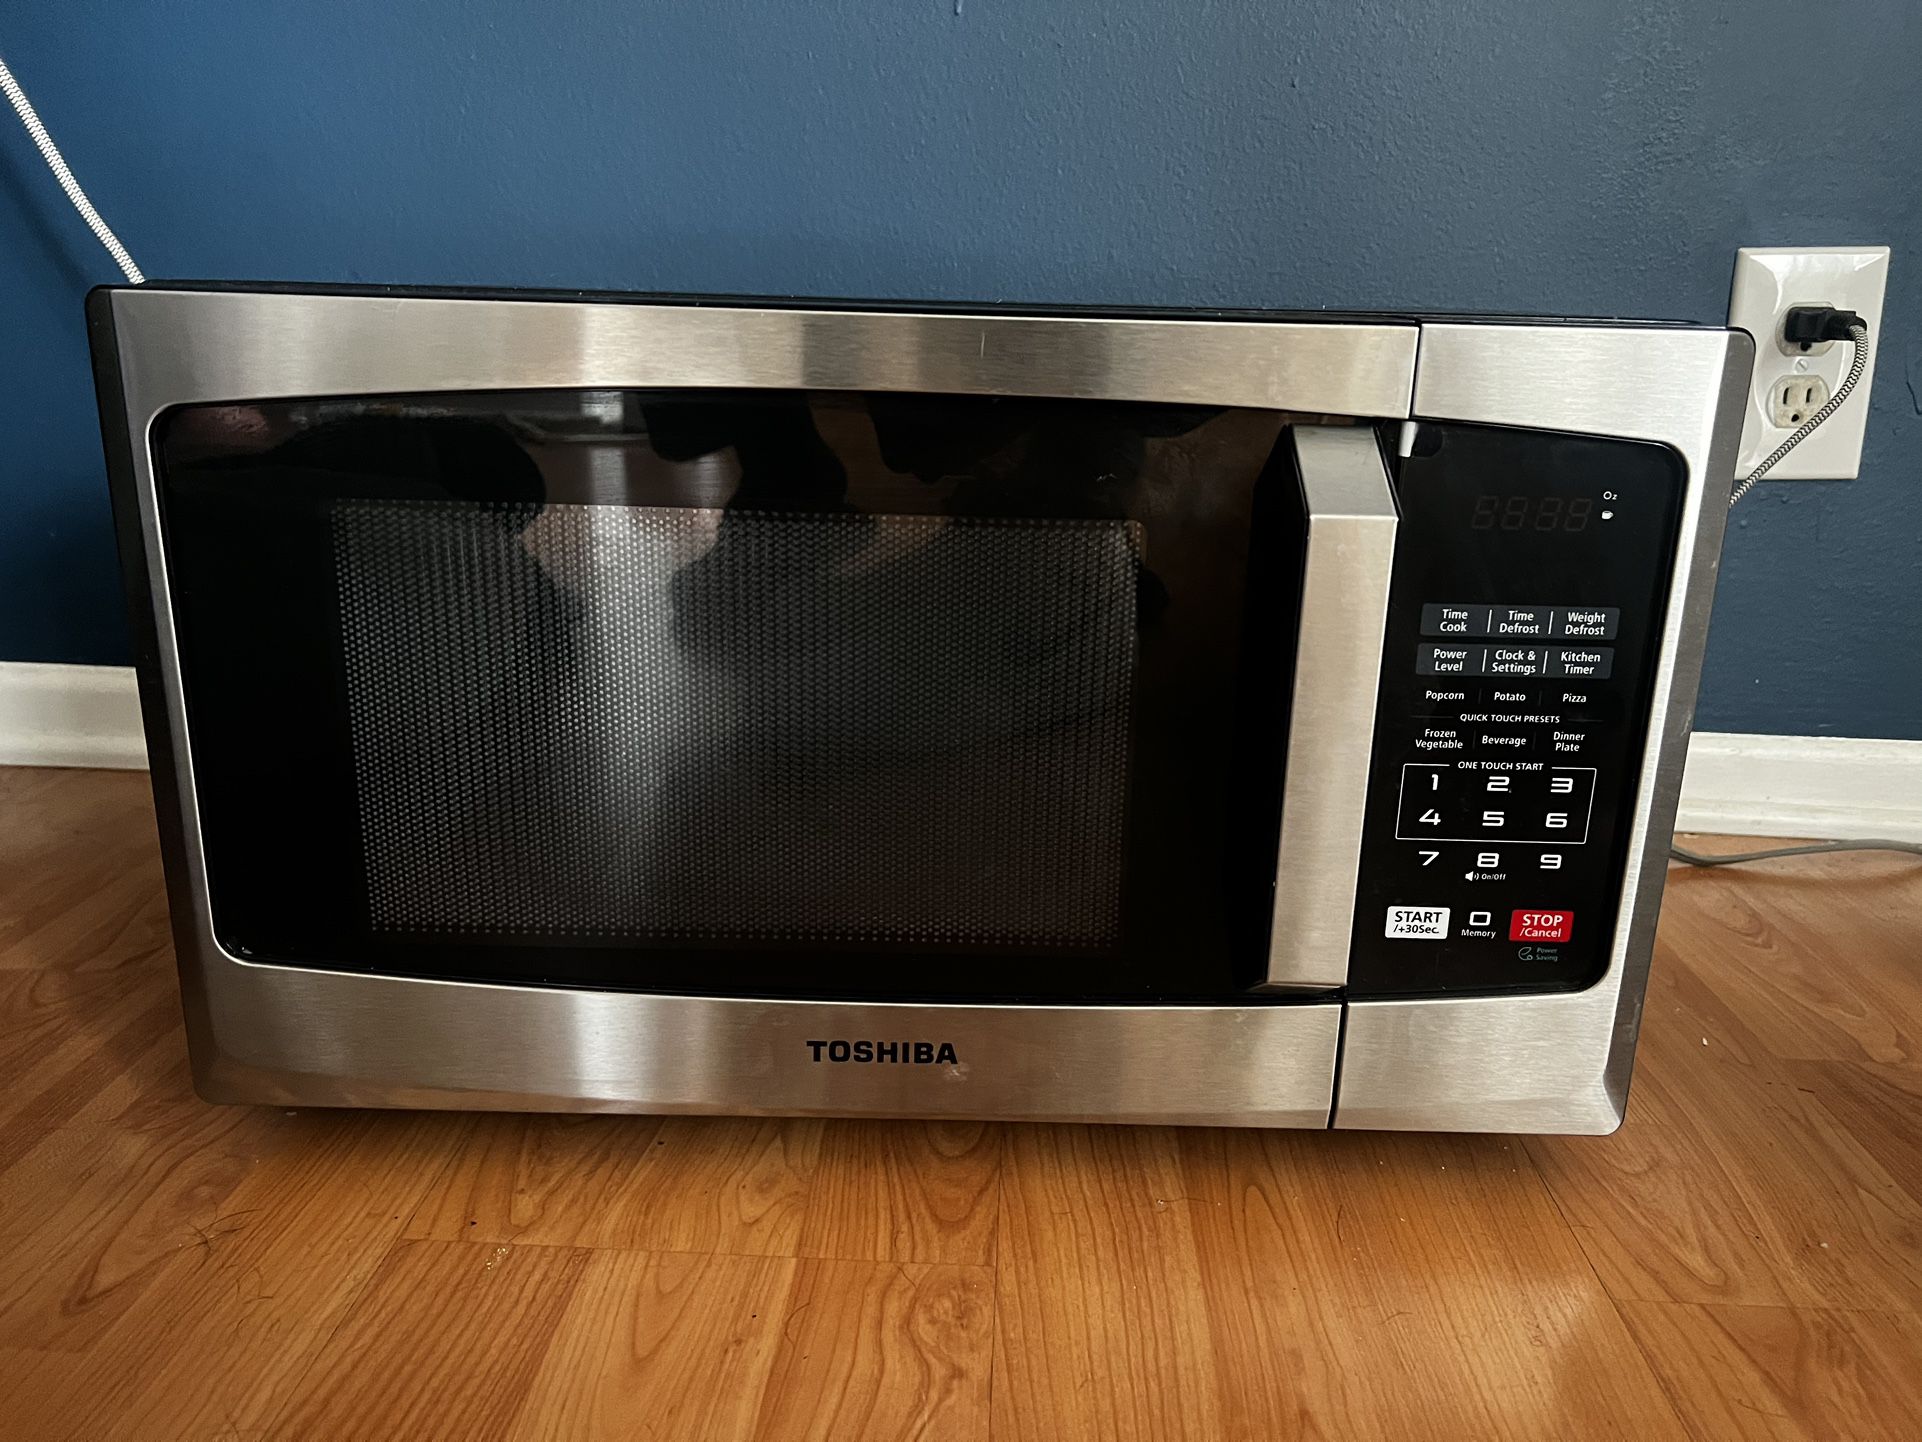 TOSHIBA Countertop Microwave Oven, 0.9 Cu Ft With 10.6 Inch